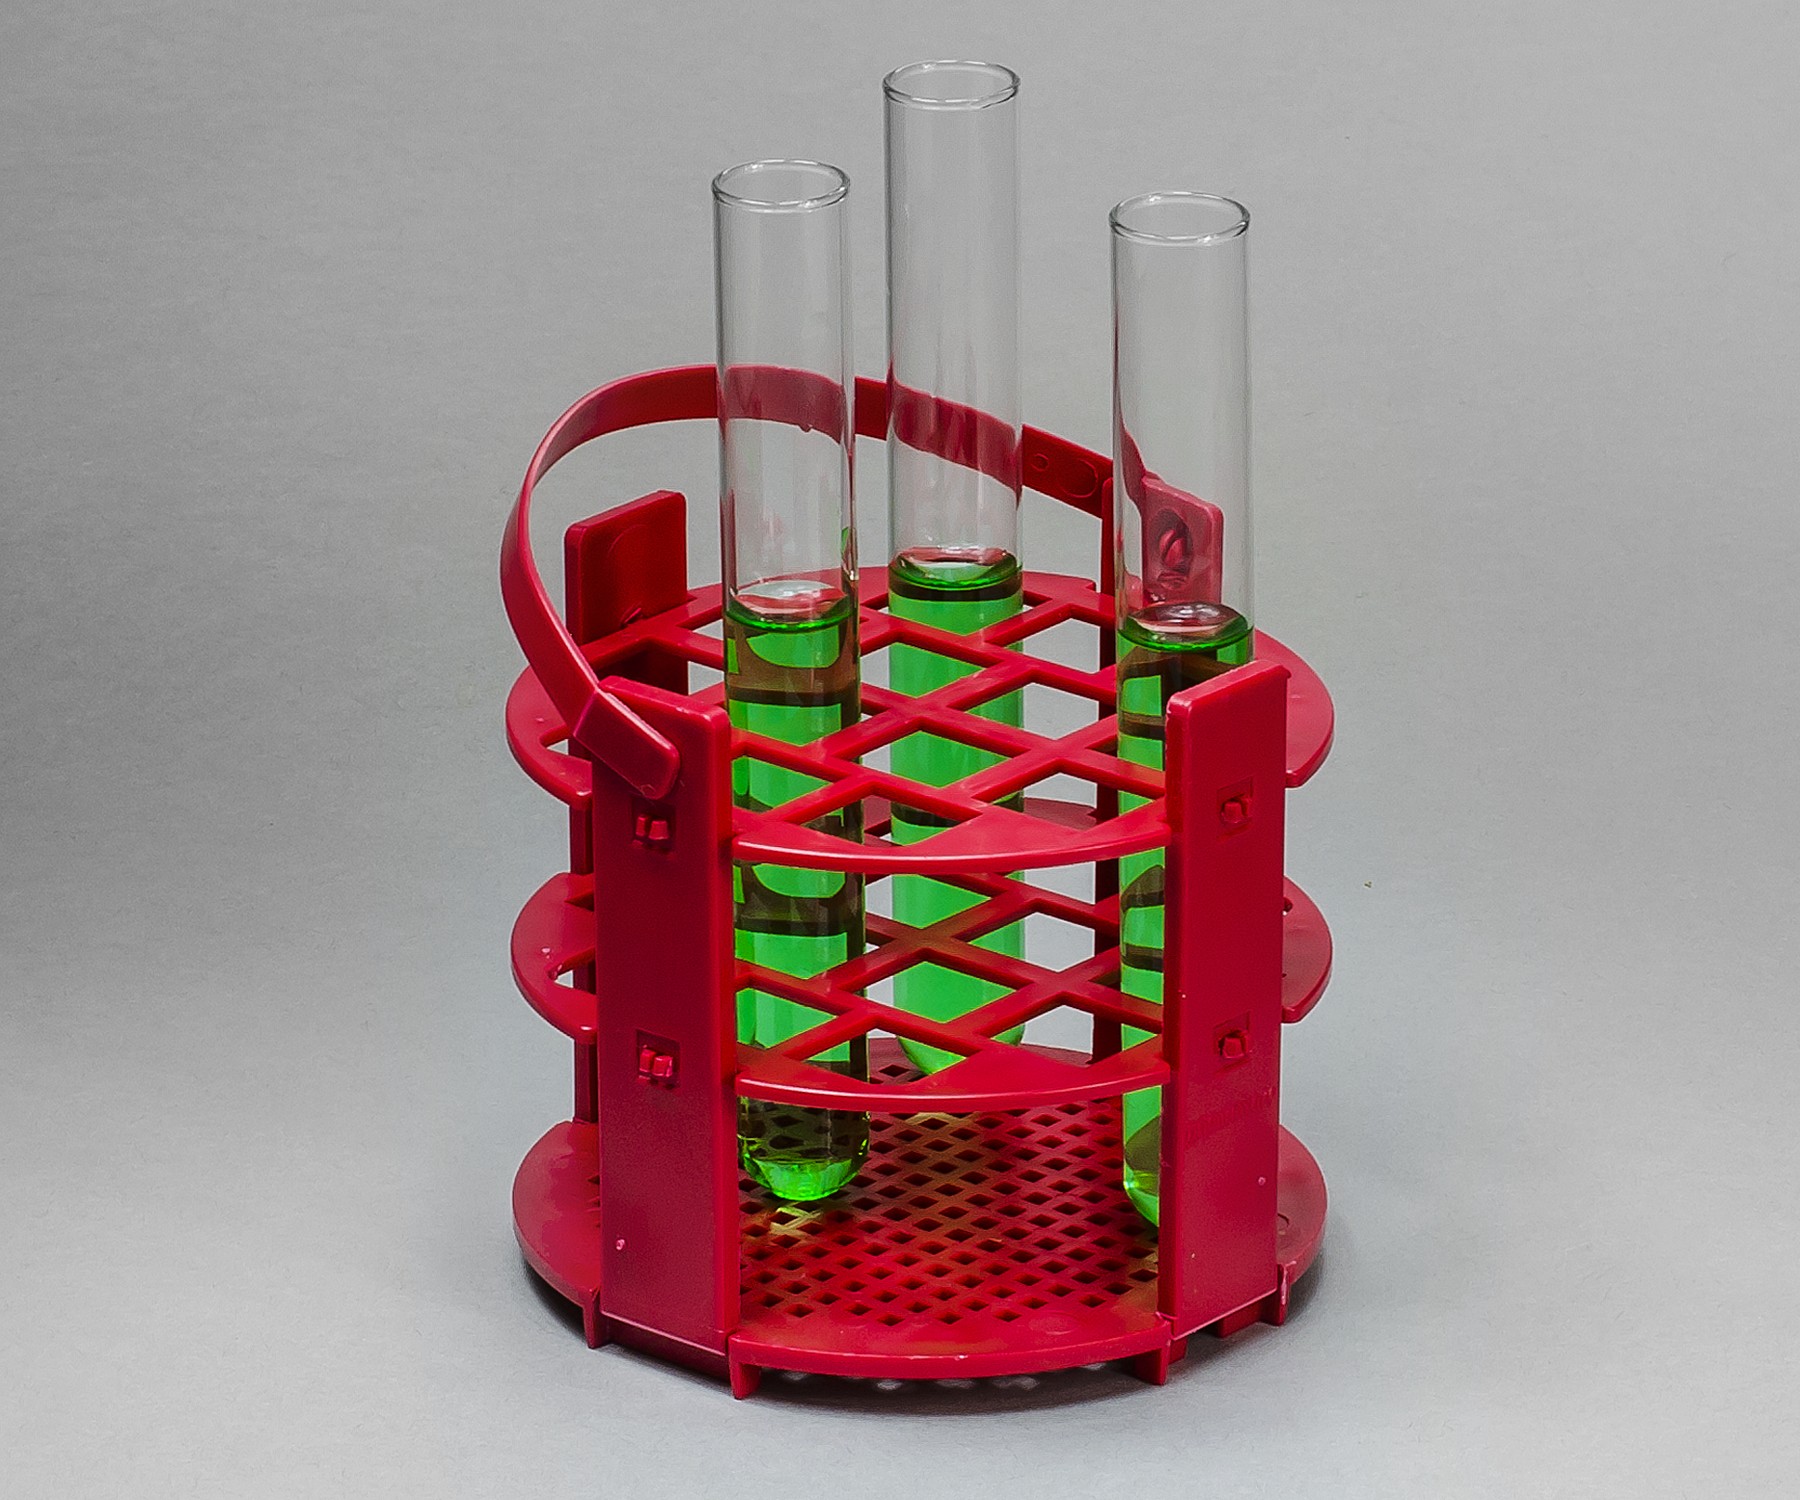 SP Bel-Art No-Wire Round Test Tube Rack; For 13-16mm Tubes, 14 Places, Red